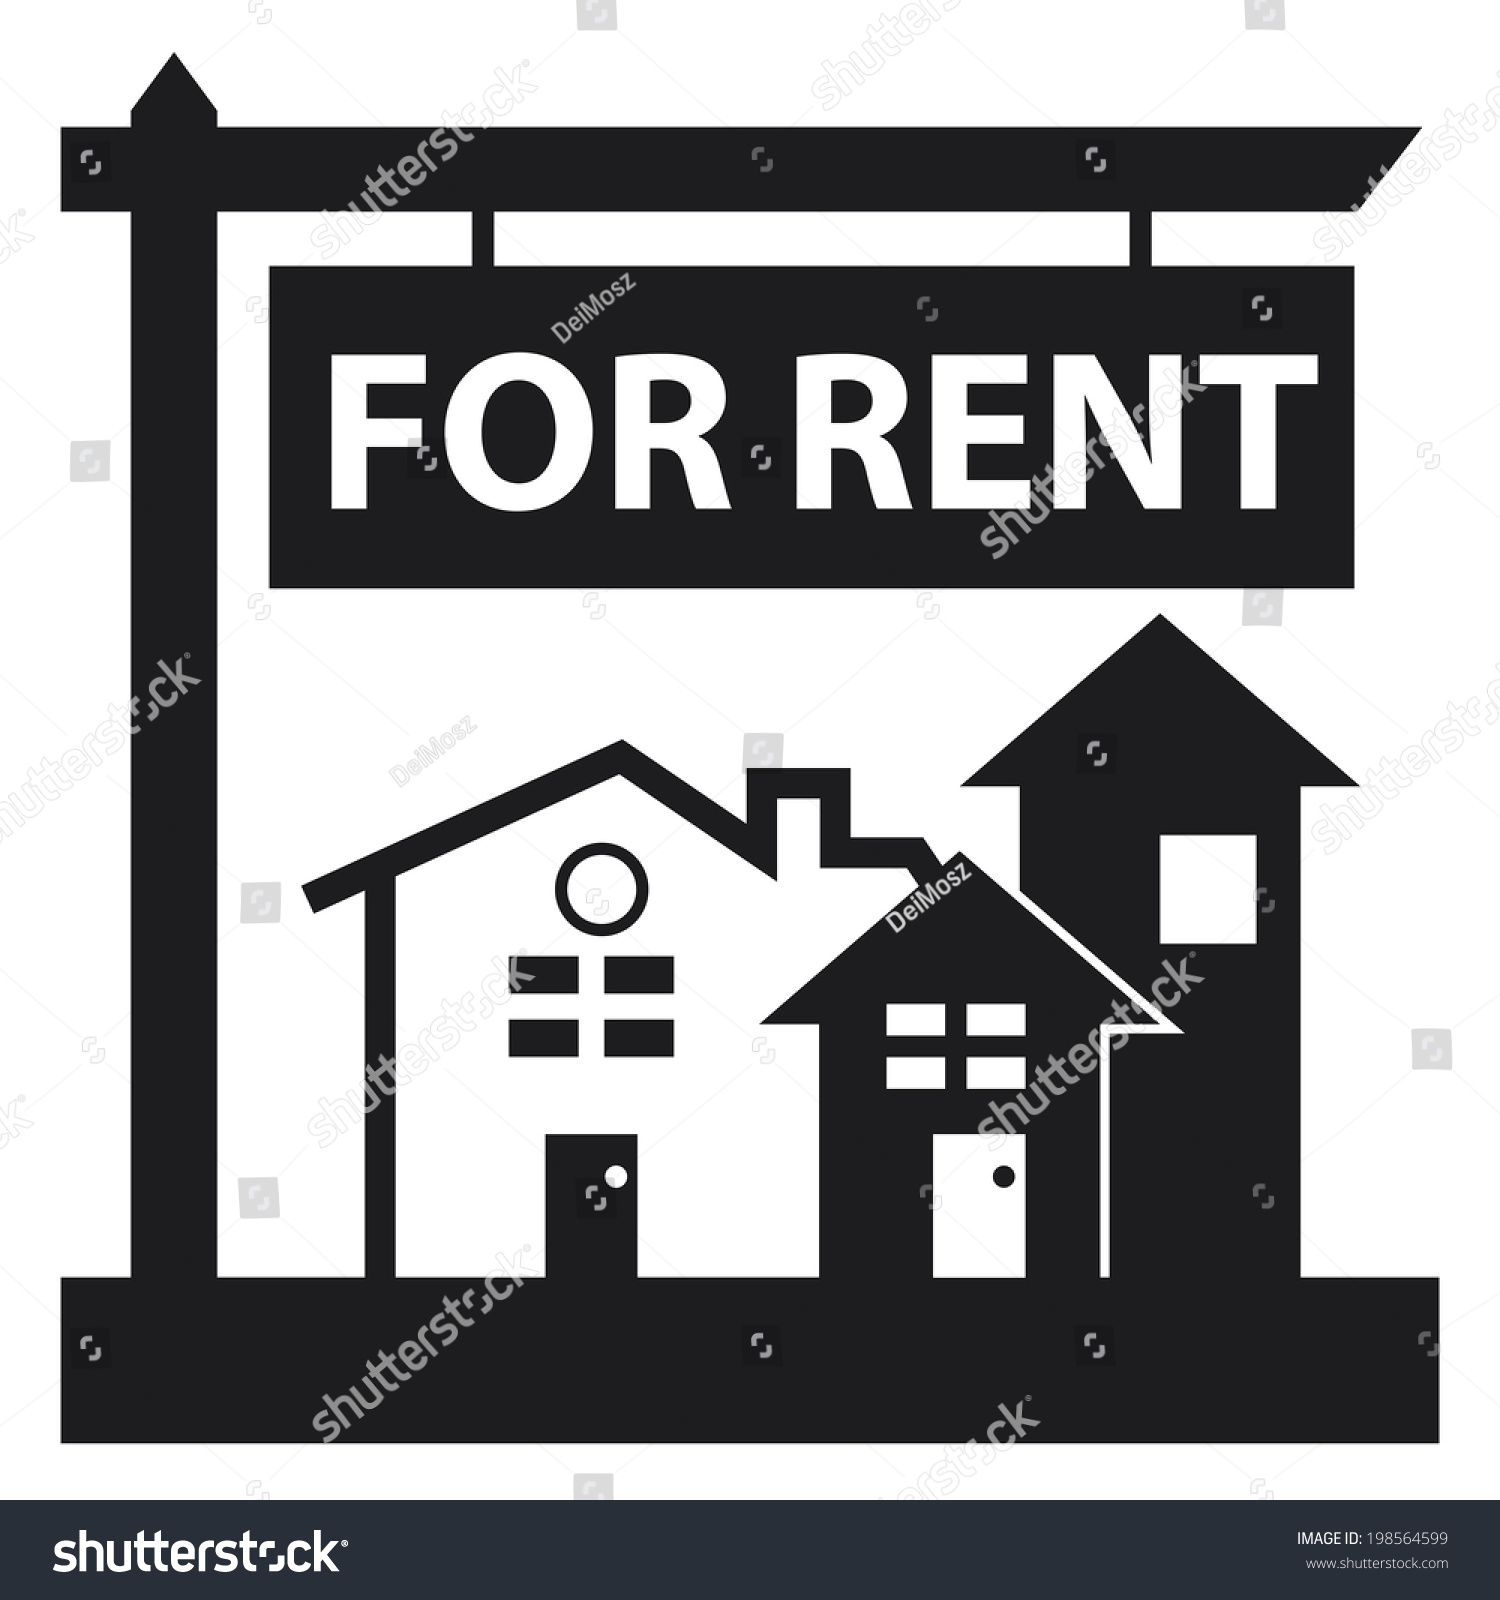 free clipart house for rent - photo #25